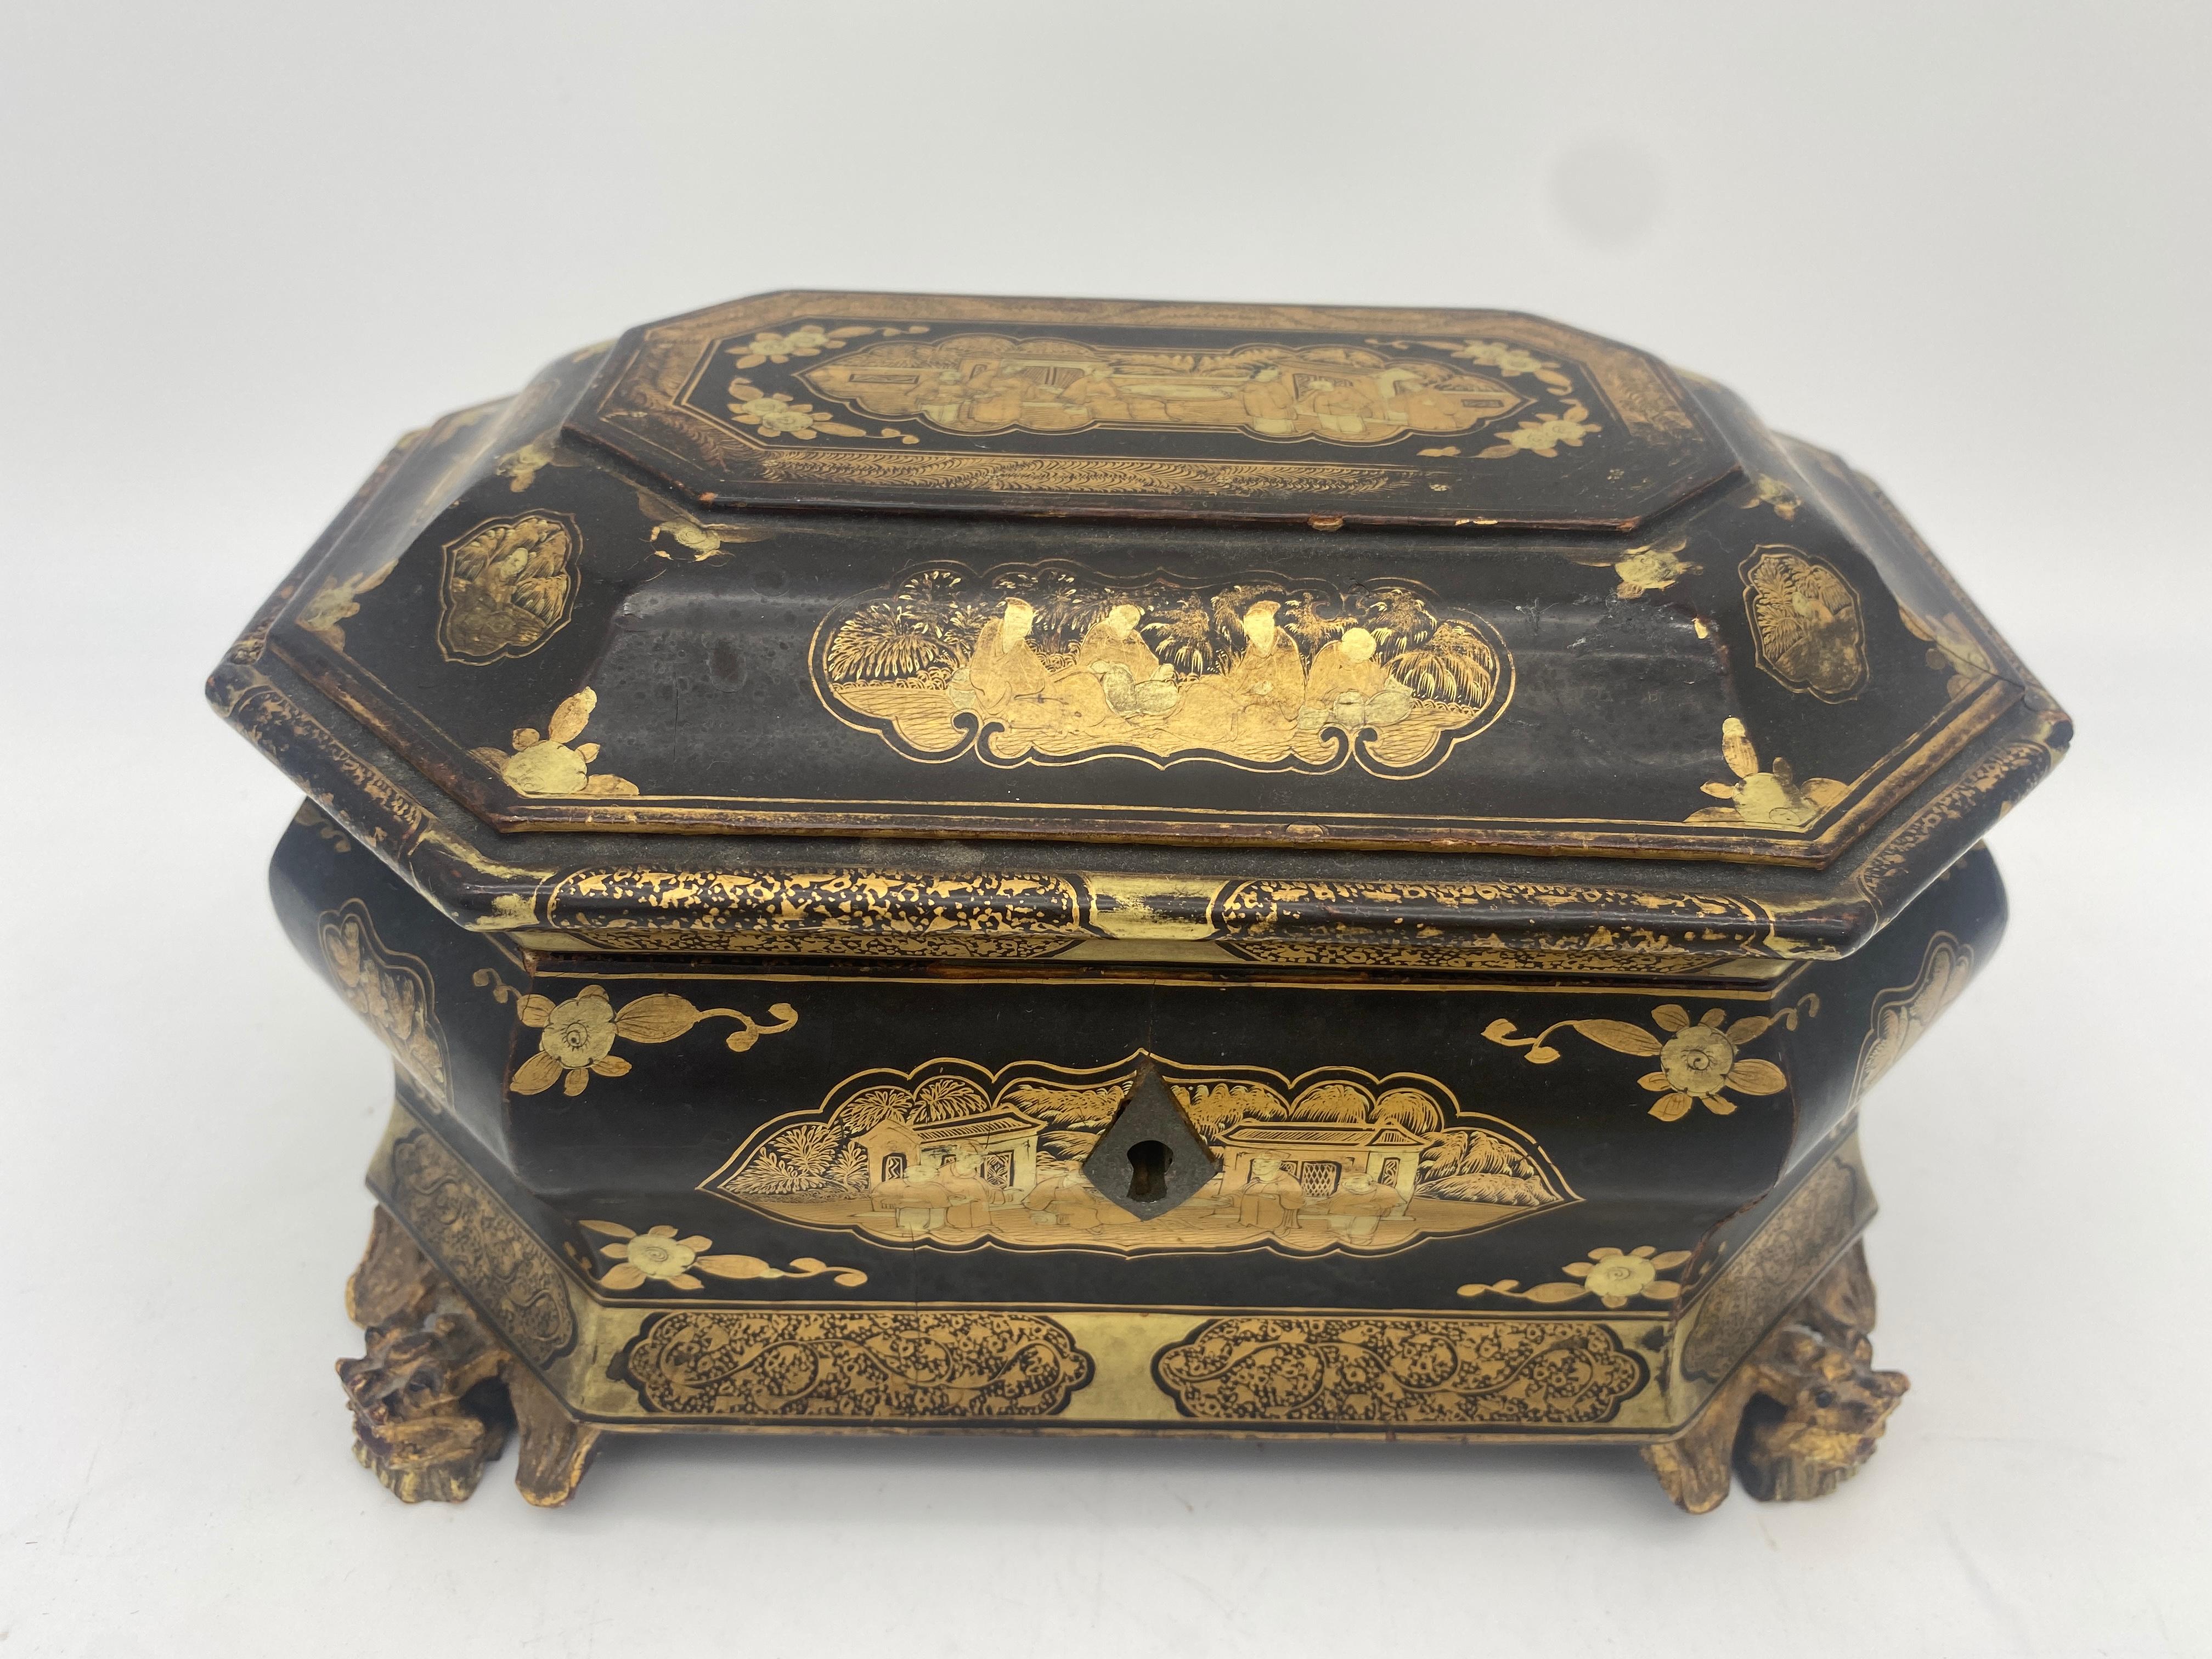 19th Century Antique Gilt Lacquer Chinese Tea Caddy For Sale 1